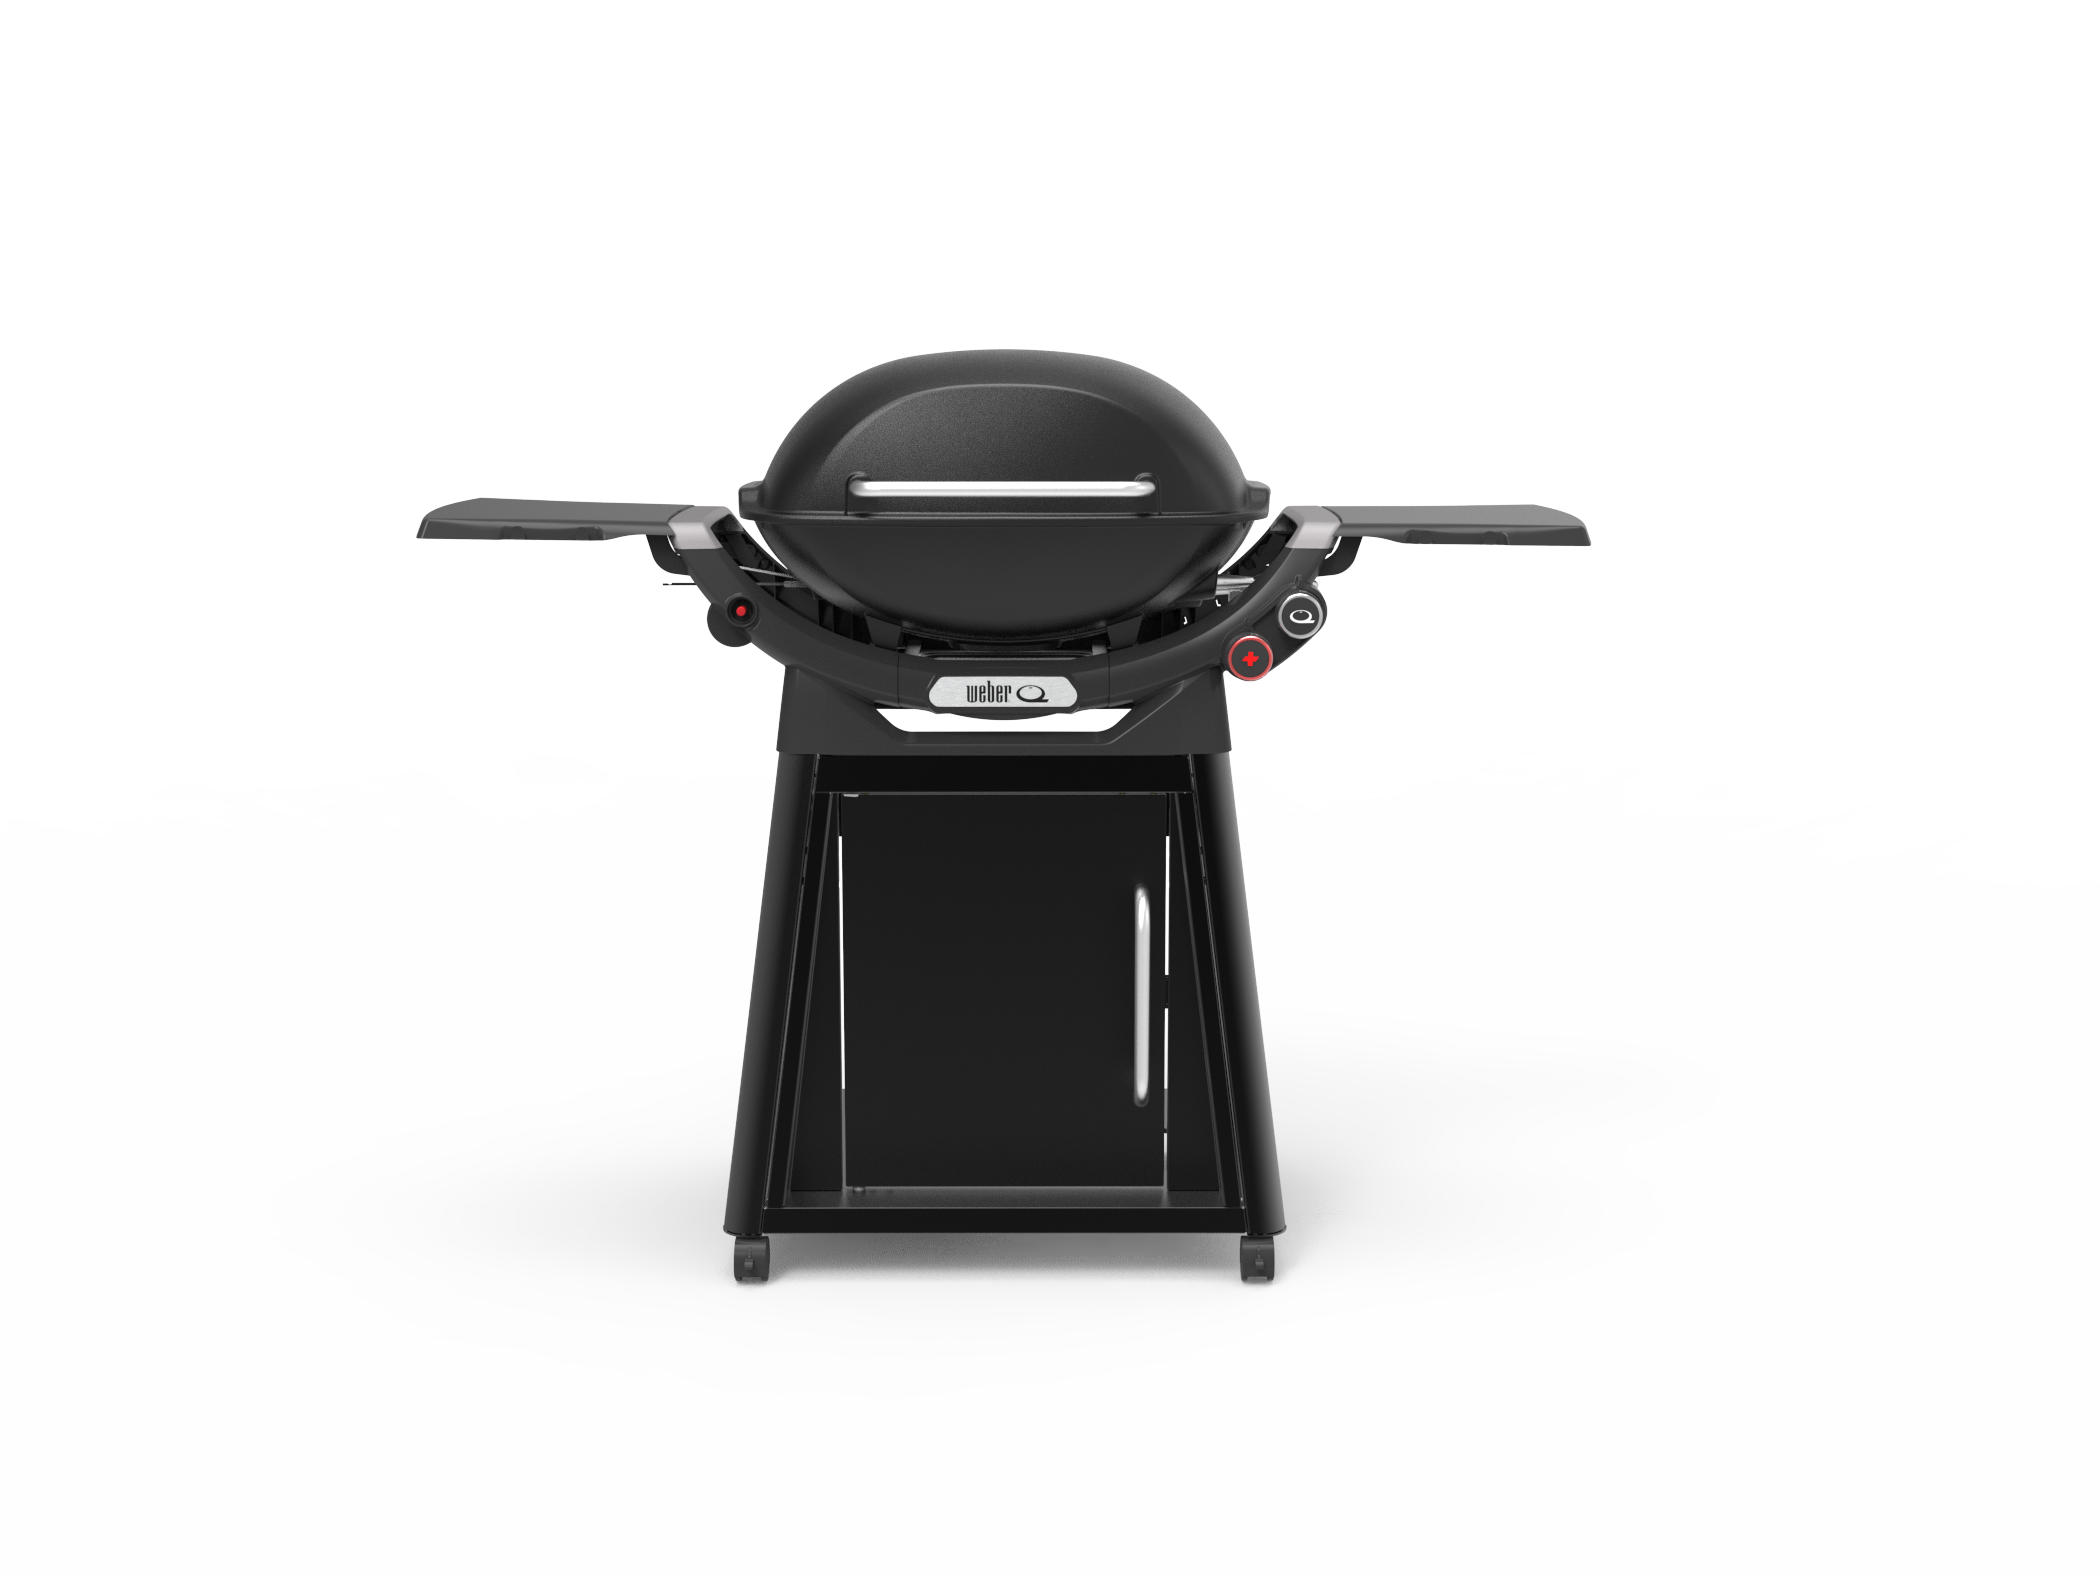 Weber Q 3100 N plus front view in midnight black